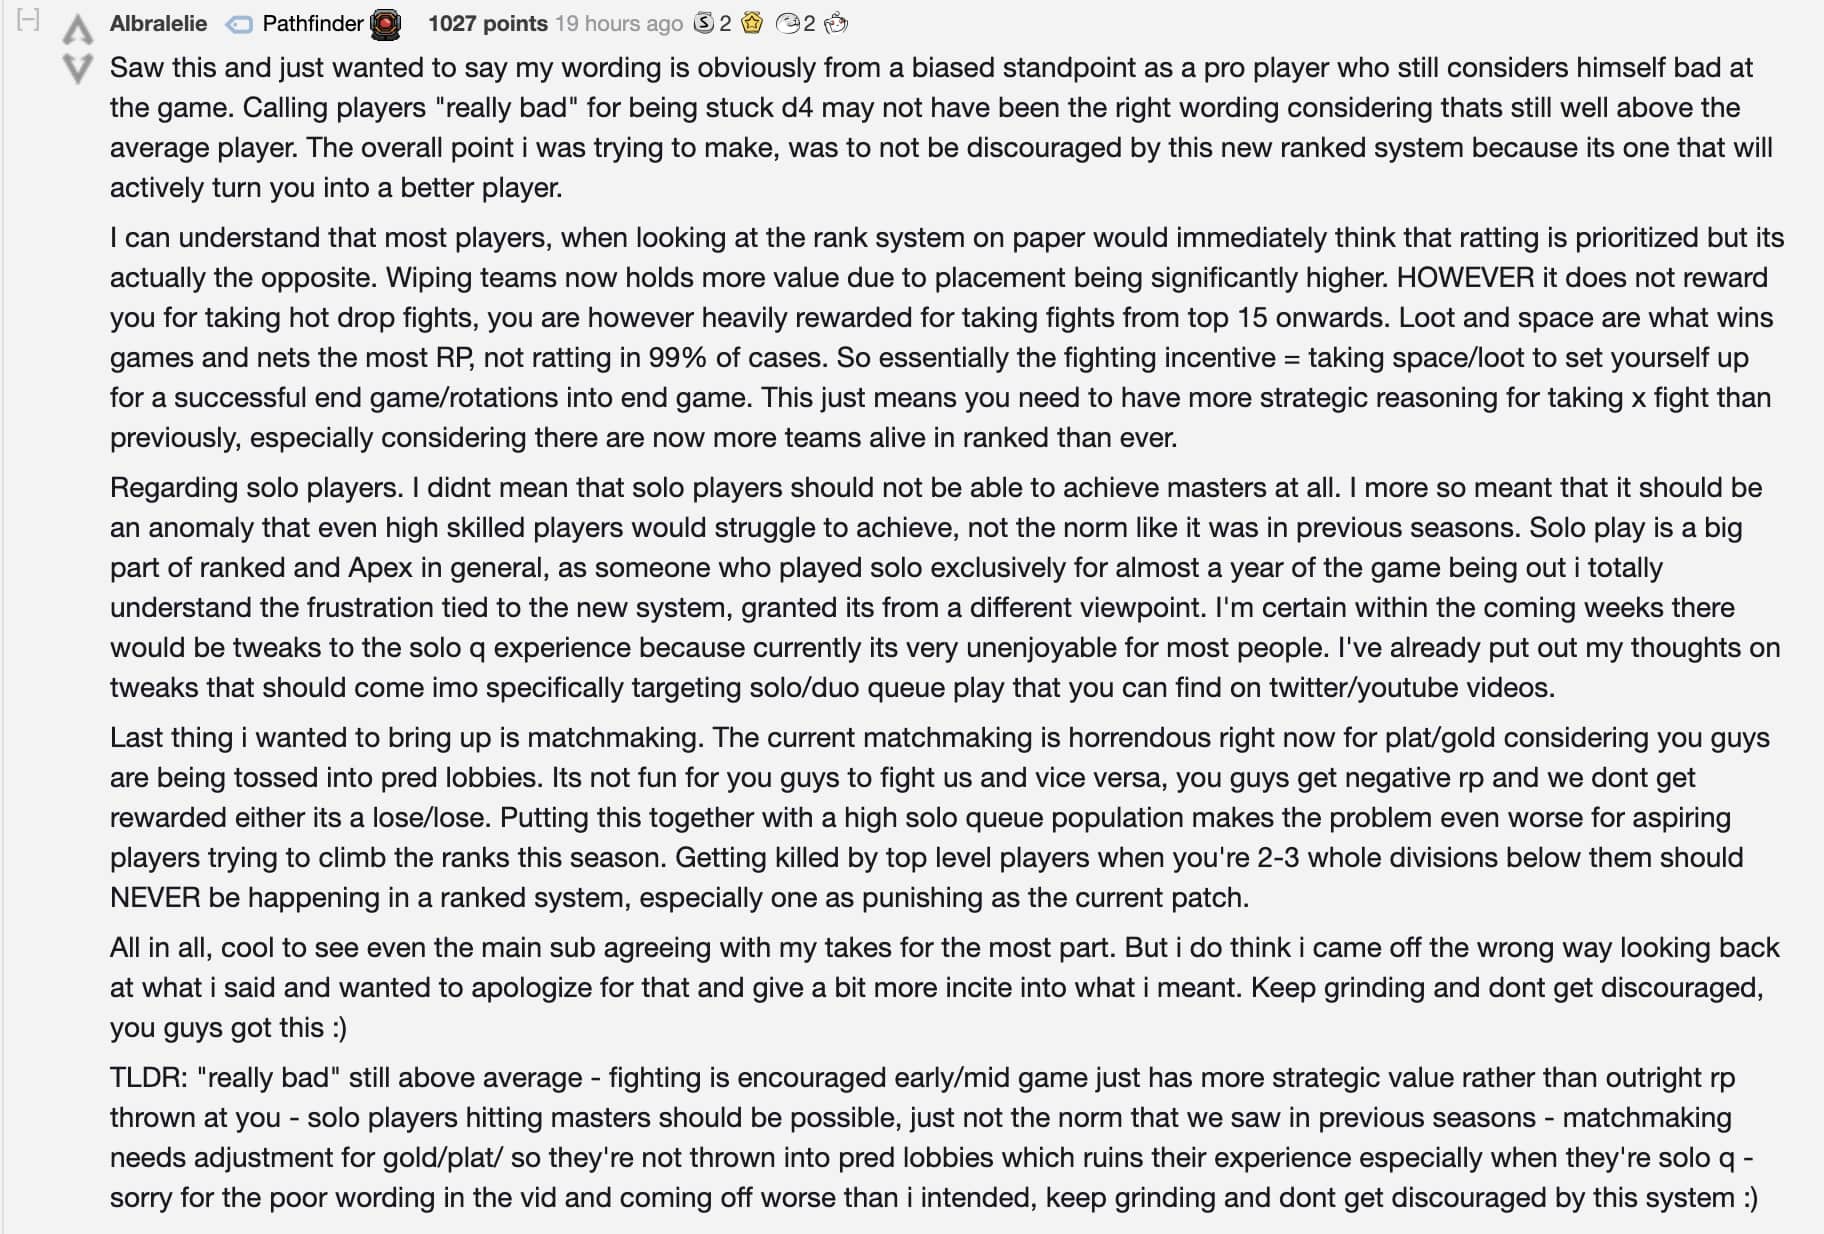 Screenshot of Reddit comment about Apex Legends Ranked from Albralelie